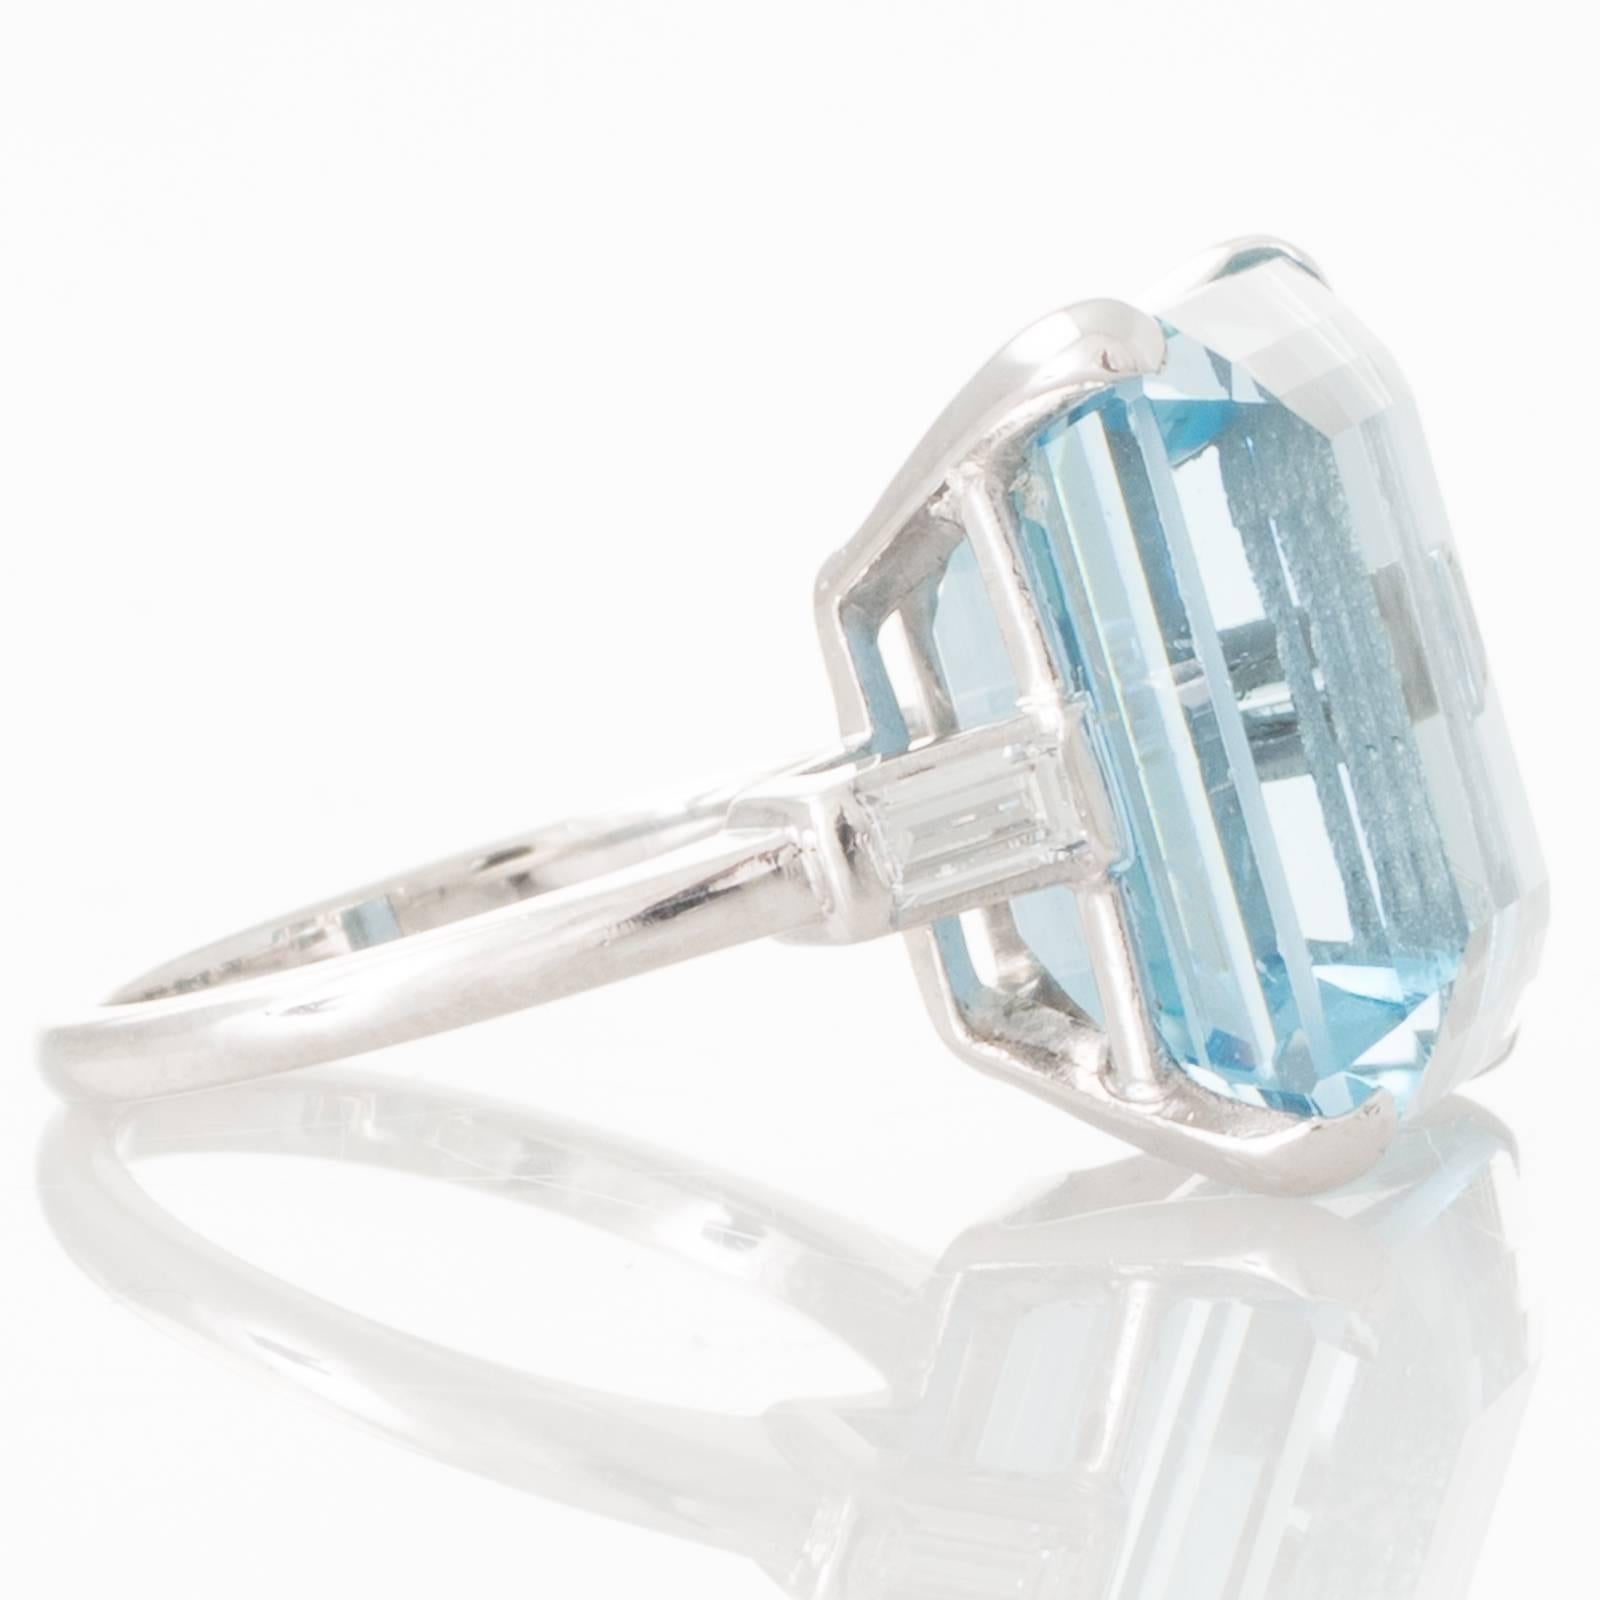 Platinum ring set in four corner claws with an estimated 12.45ct step cut aquamarine in a double railed box mount, and to either side a baguete cut diamond in the sloping shoulders and a plain polished band.
Total Estimated Aquamarine Weight: